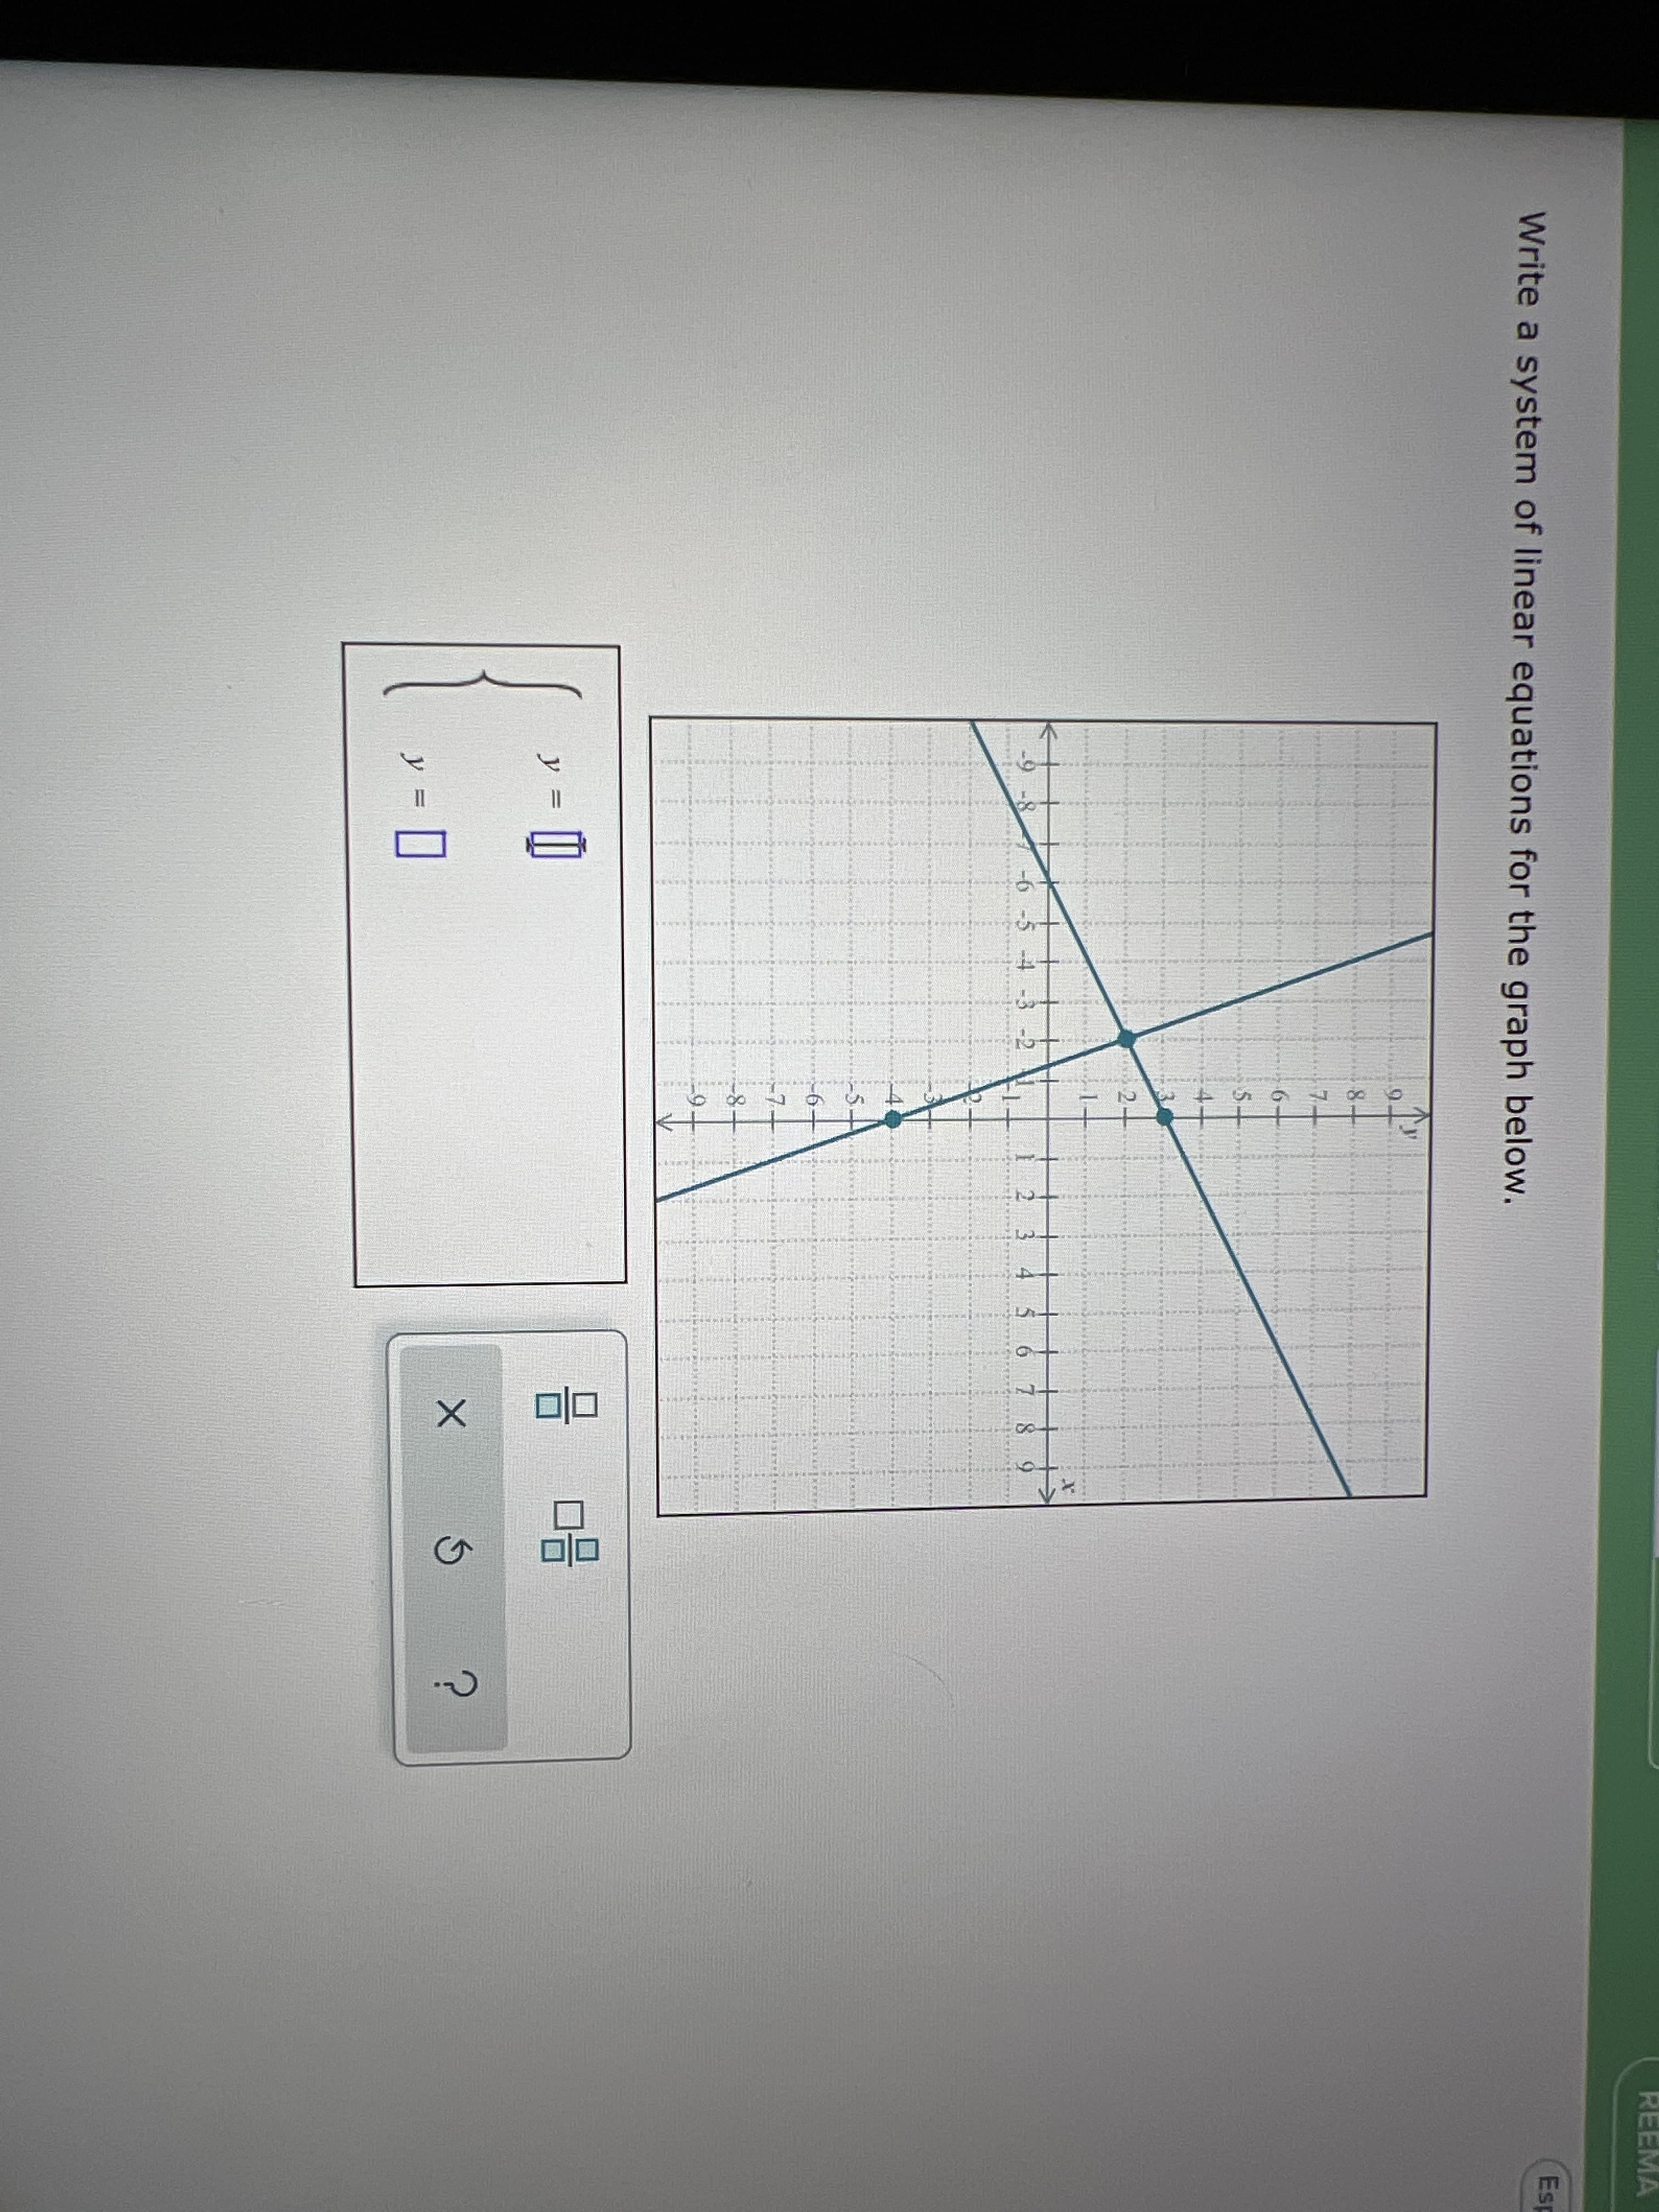 REEMA
Esp
Write a system of linear equations for the graph below.
7.
5.
-
2.
-9 -8
-6 -5 -4 -3 -2
1 2 3 4 $ 6 7 8 9
5-
-7.
y
y
